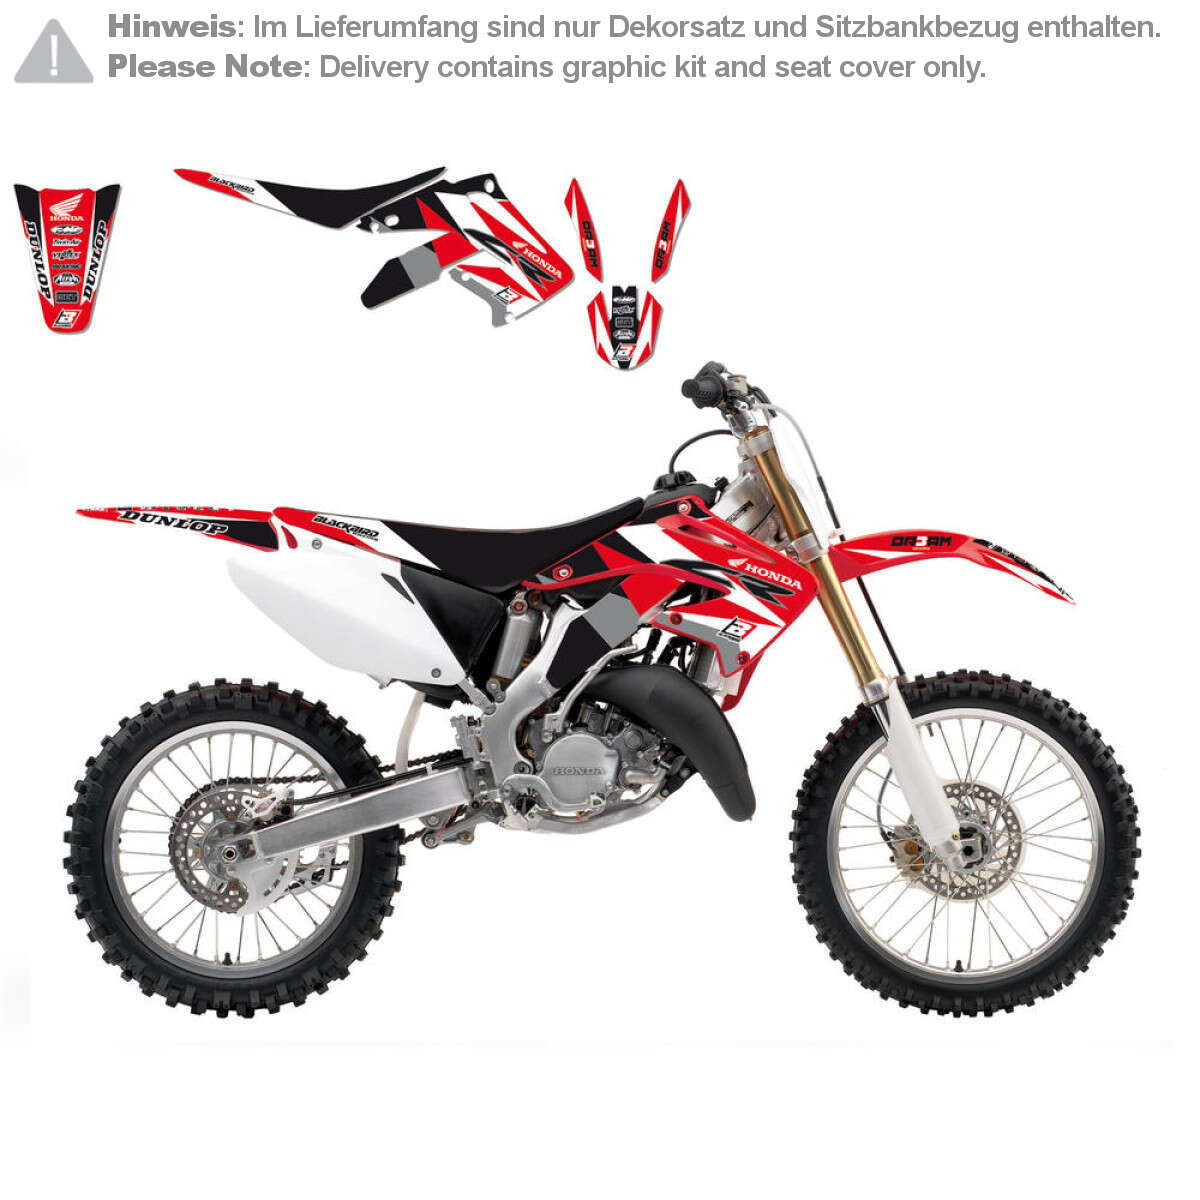 Blackbird Racing Graphic Kit with Seat Cover Dream 3 Honda CR 125/250 02-07, Red/Black/White